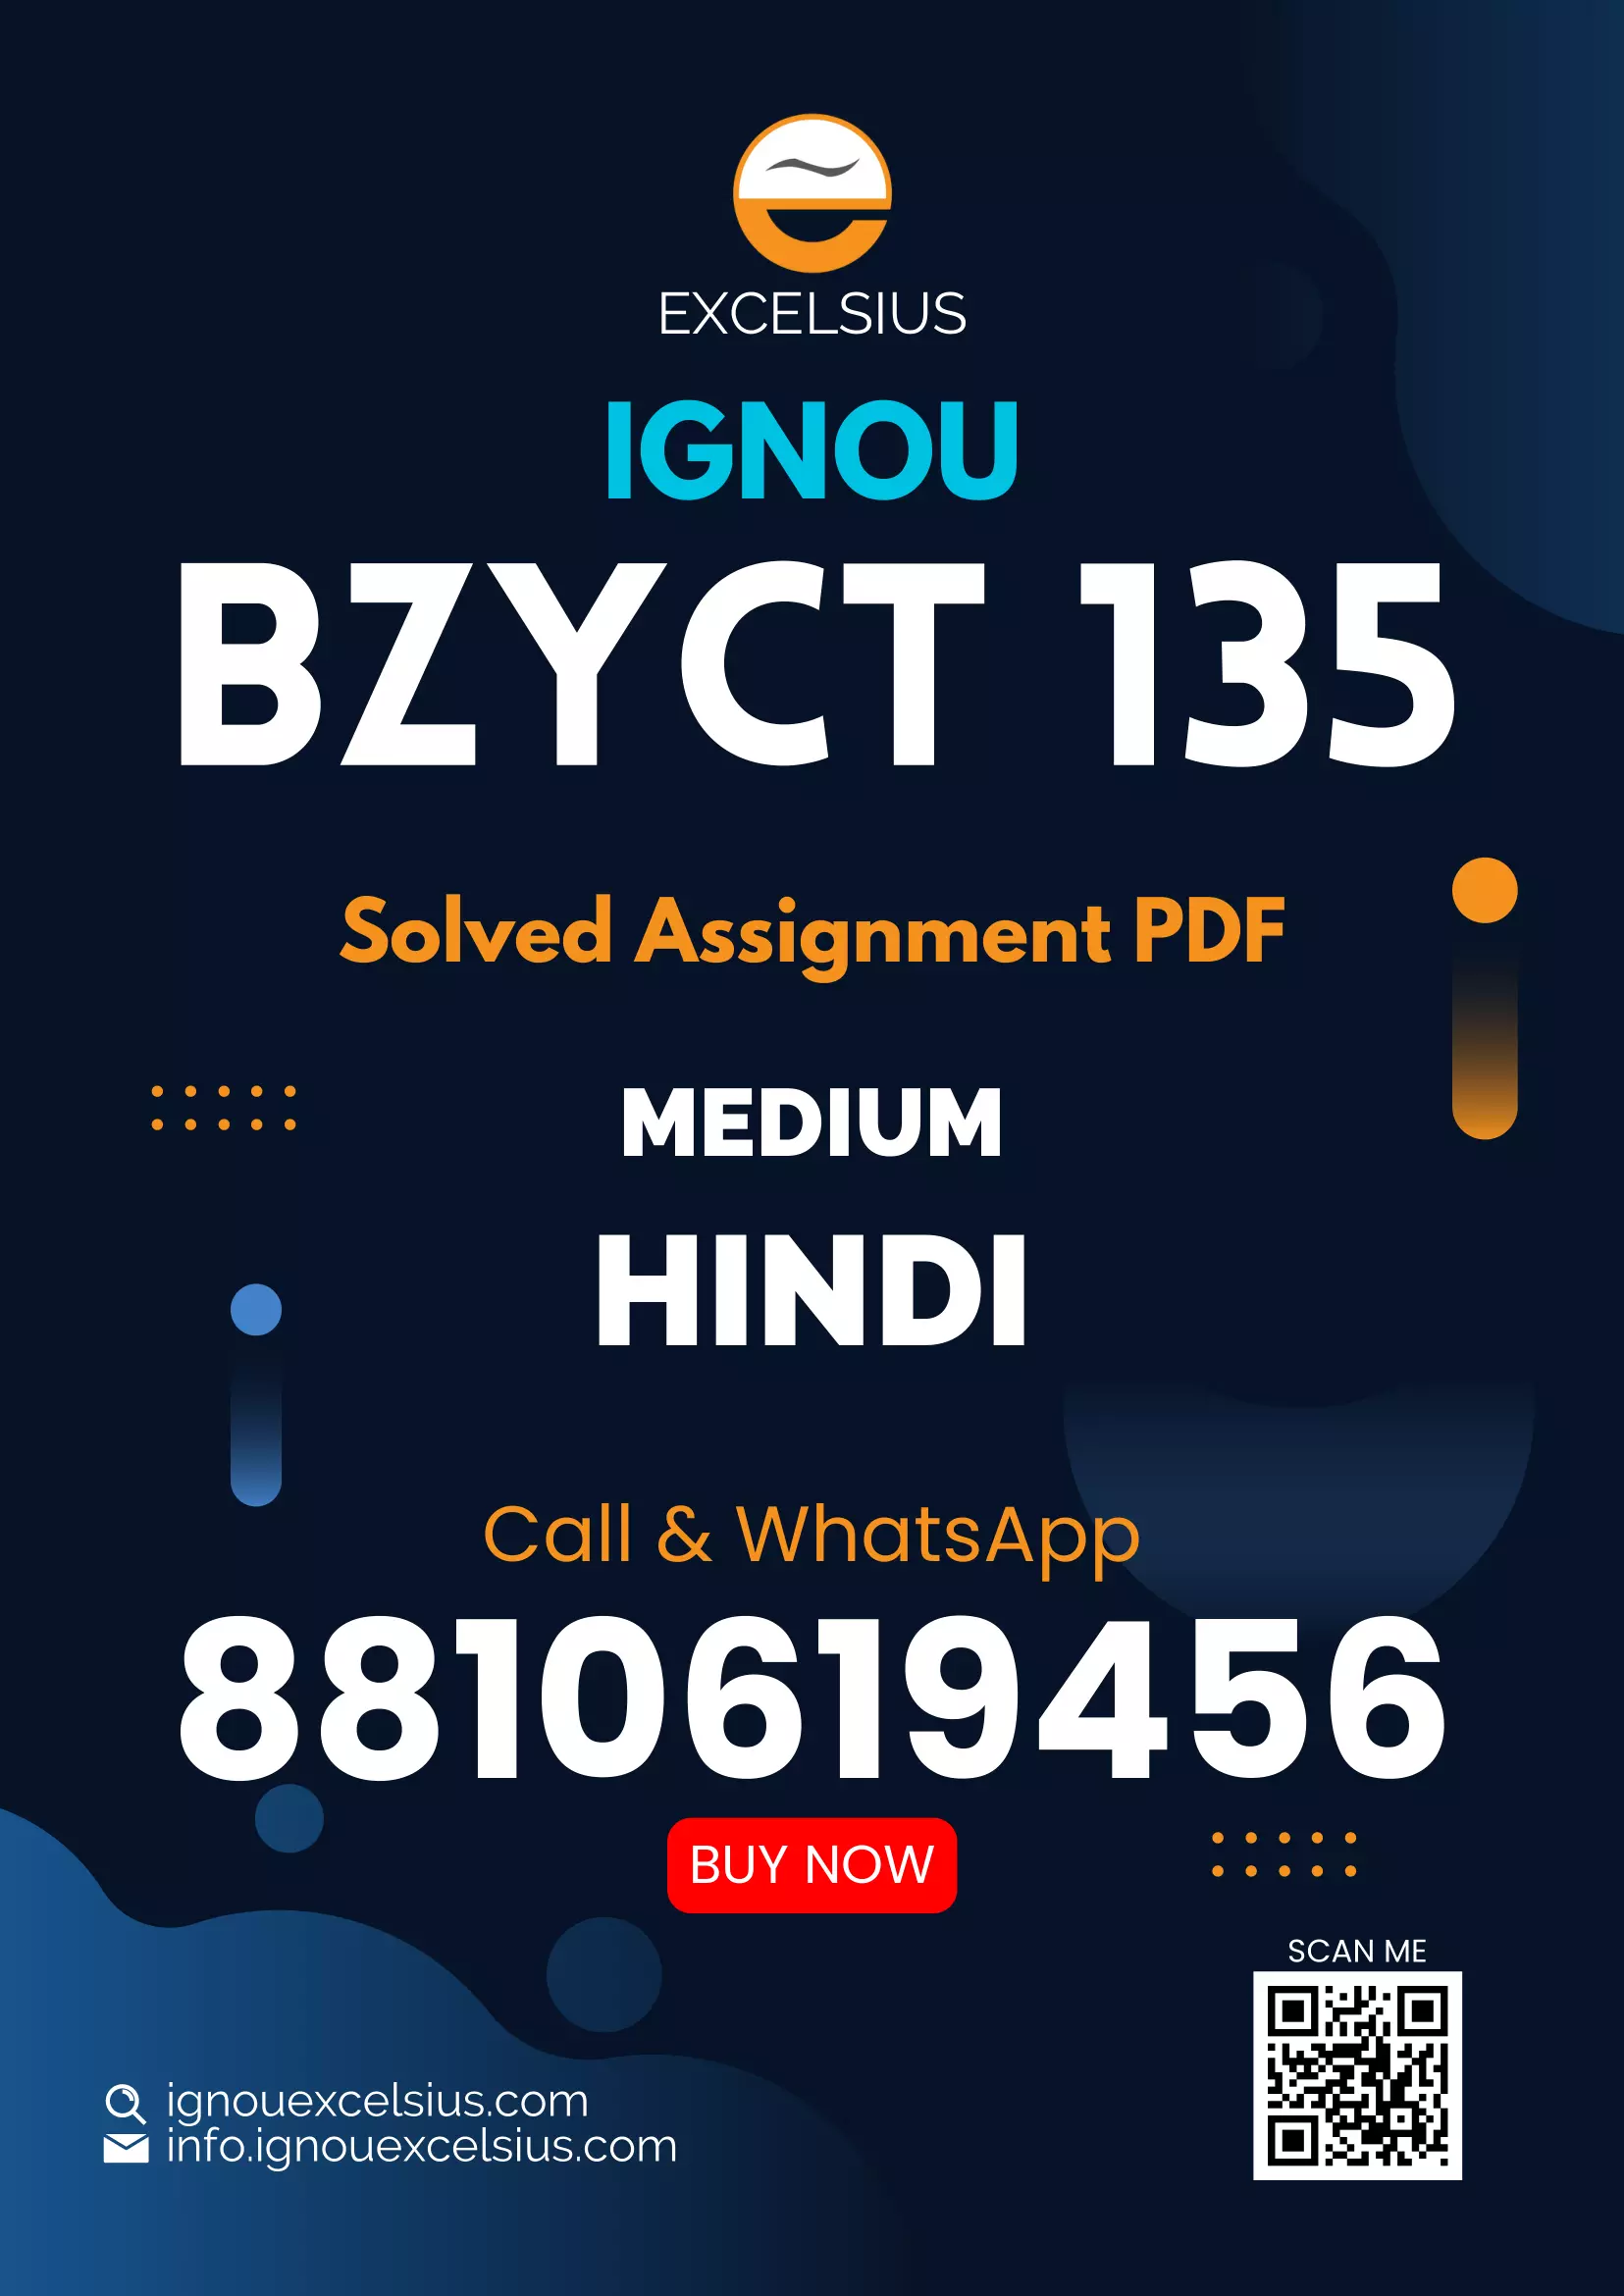 IGNOU BZYCT-135 - Physiology and Biochemistry, Latest Solved Assignment-January 2023 - December 2023